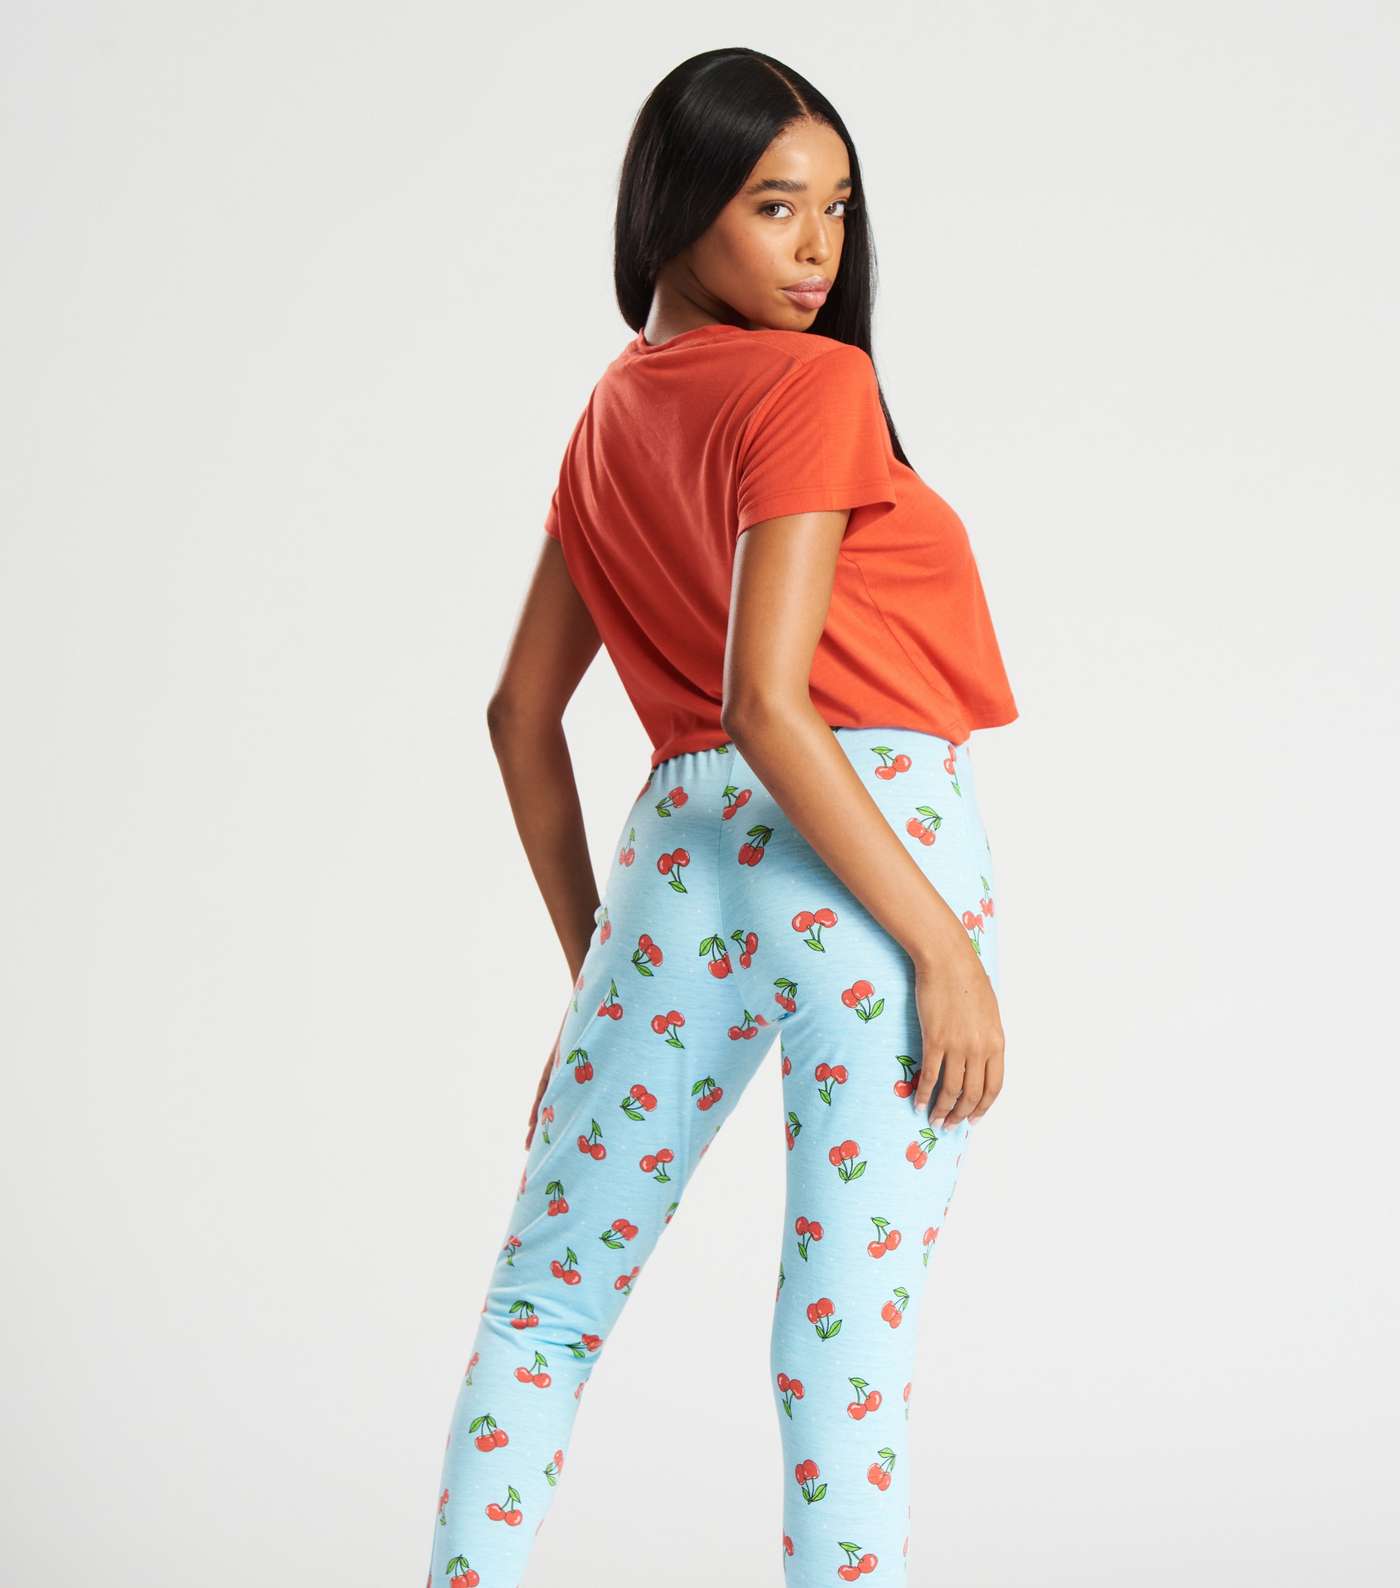 Loungeable Red Legging Pyjama Set with Cherry Print Image 2